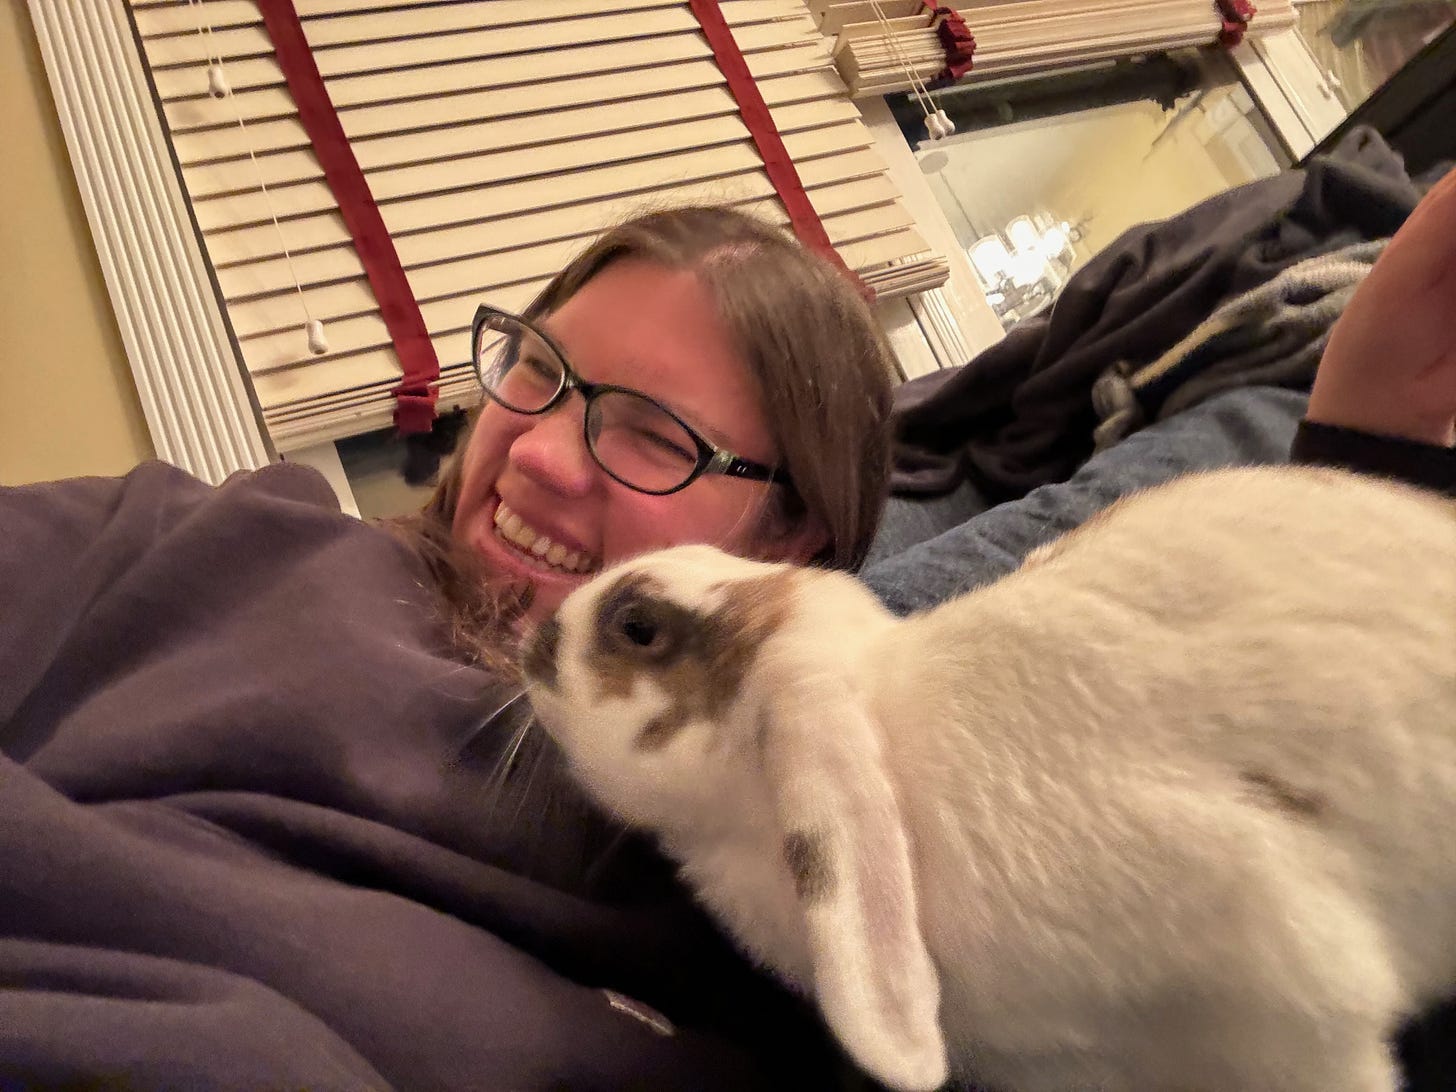 Me (a white woman in a Black sweatshirt) with a white lop rabbit with brown splotches licking her